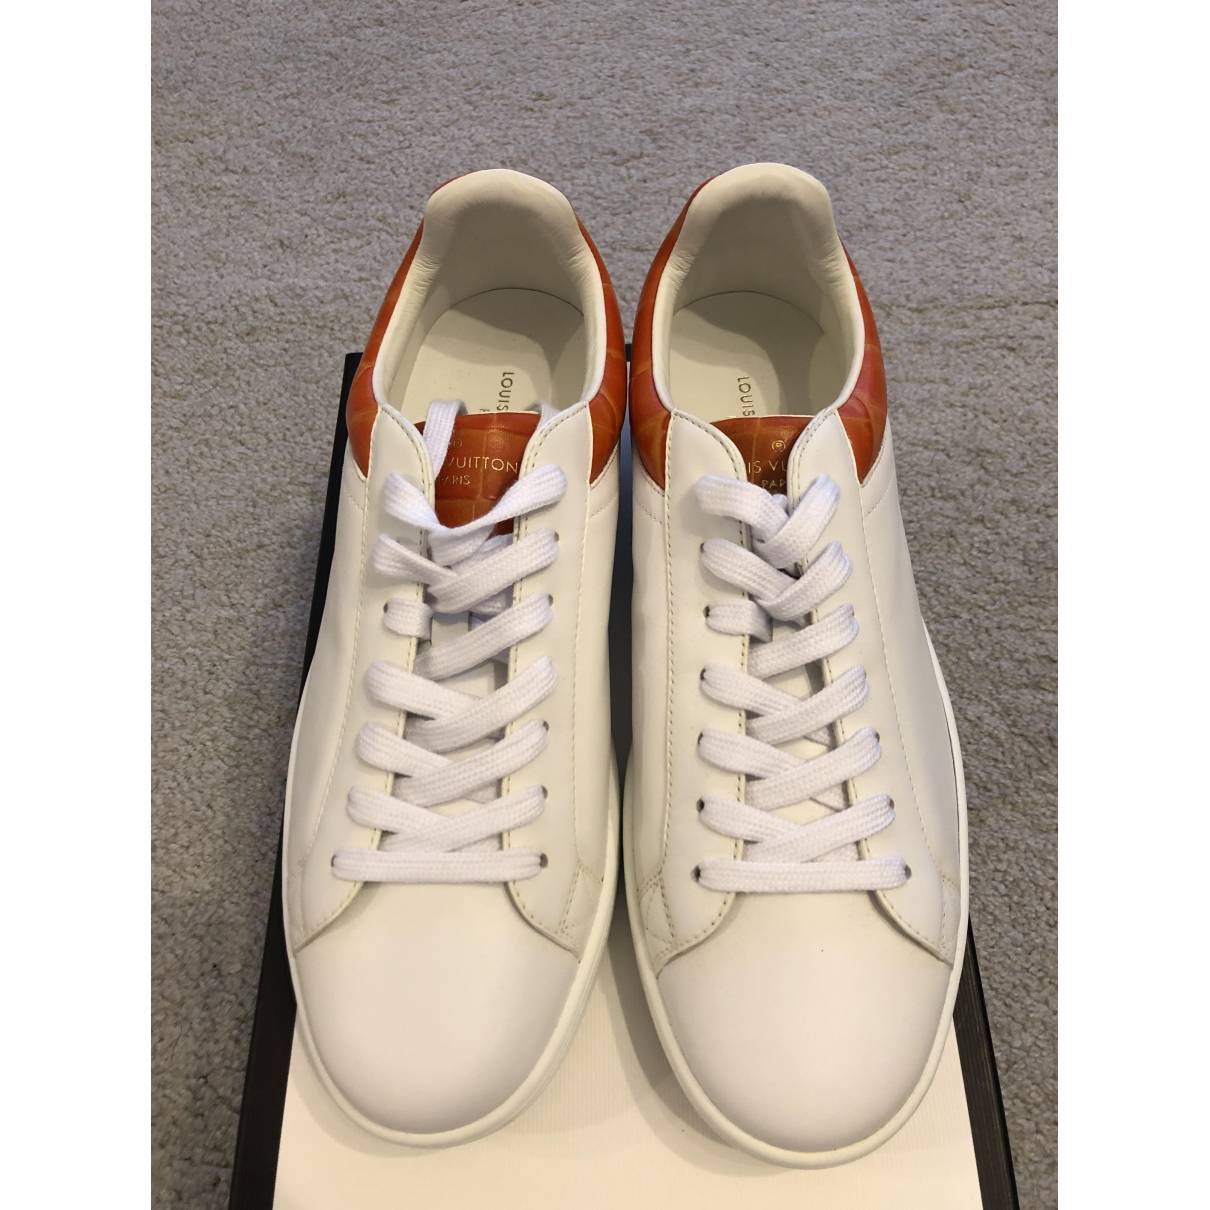 Louis Vuitton - Authenticated Luxembourg Trainer - Leather White Plain for Men, Never Worn